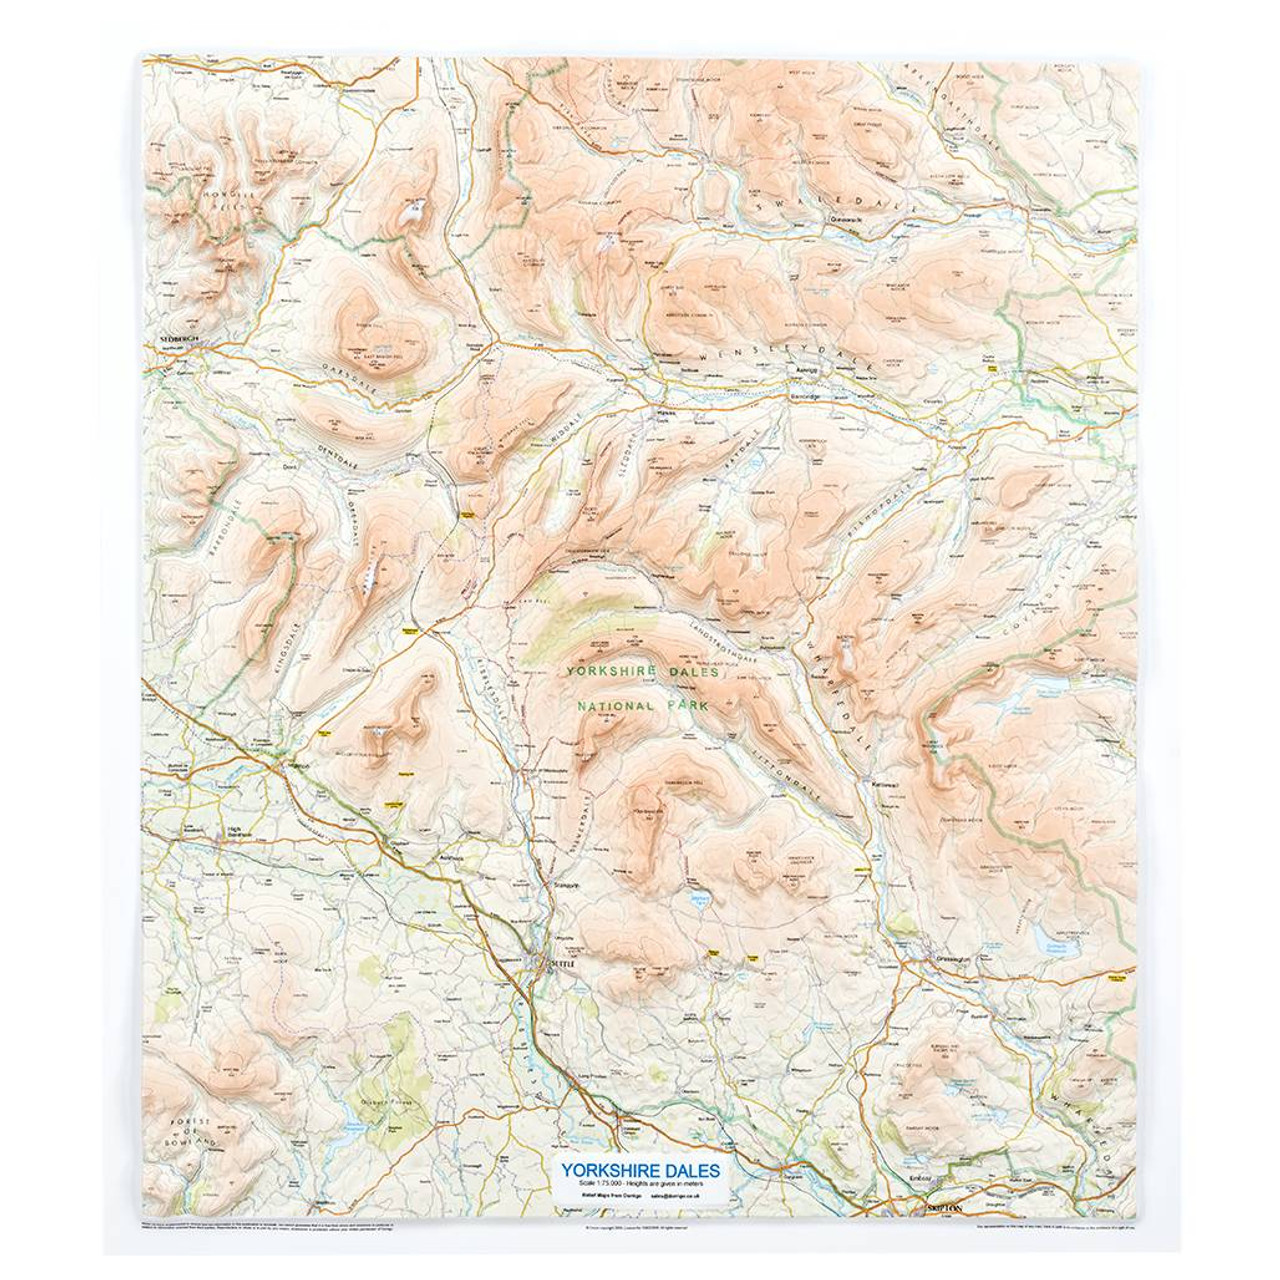 3d Yorkshire Dales Relief Map